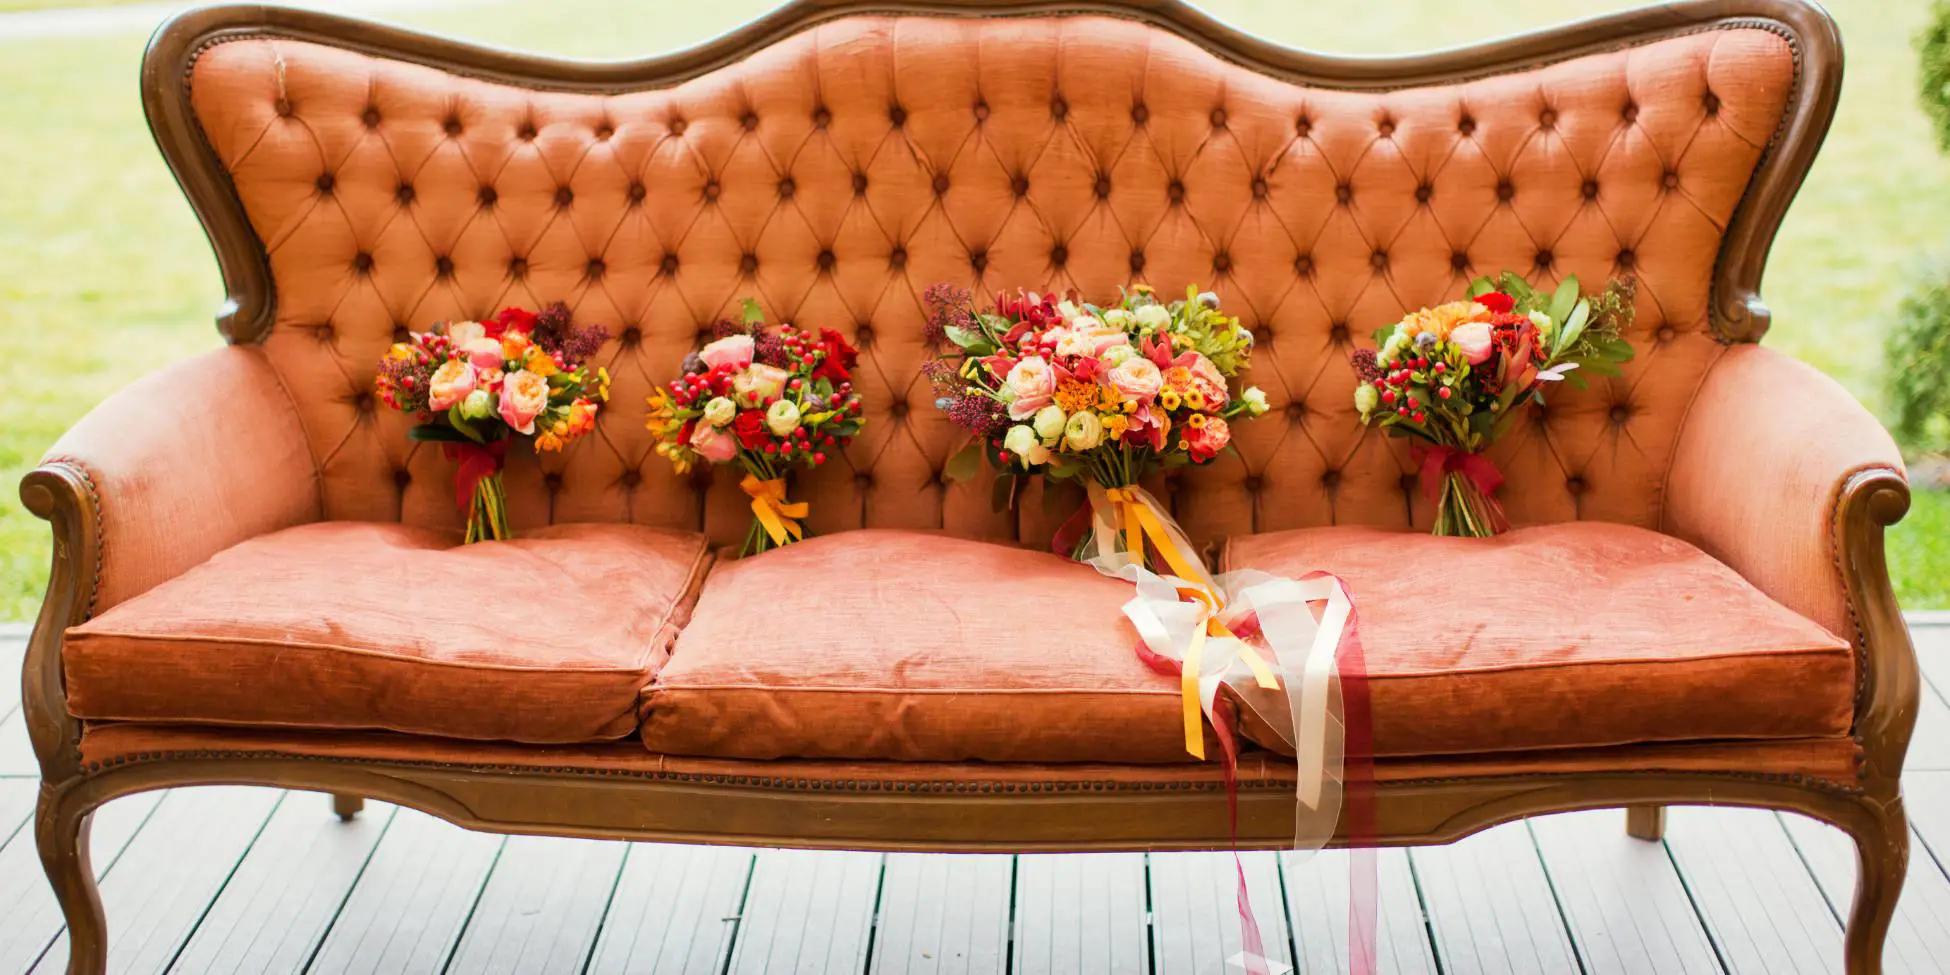 5 Favorite Fall Wedding Color Combos Image